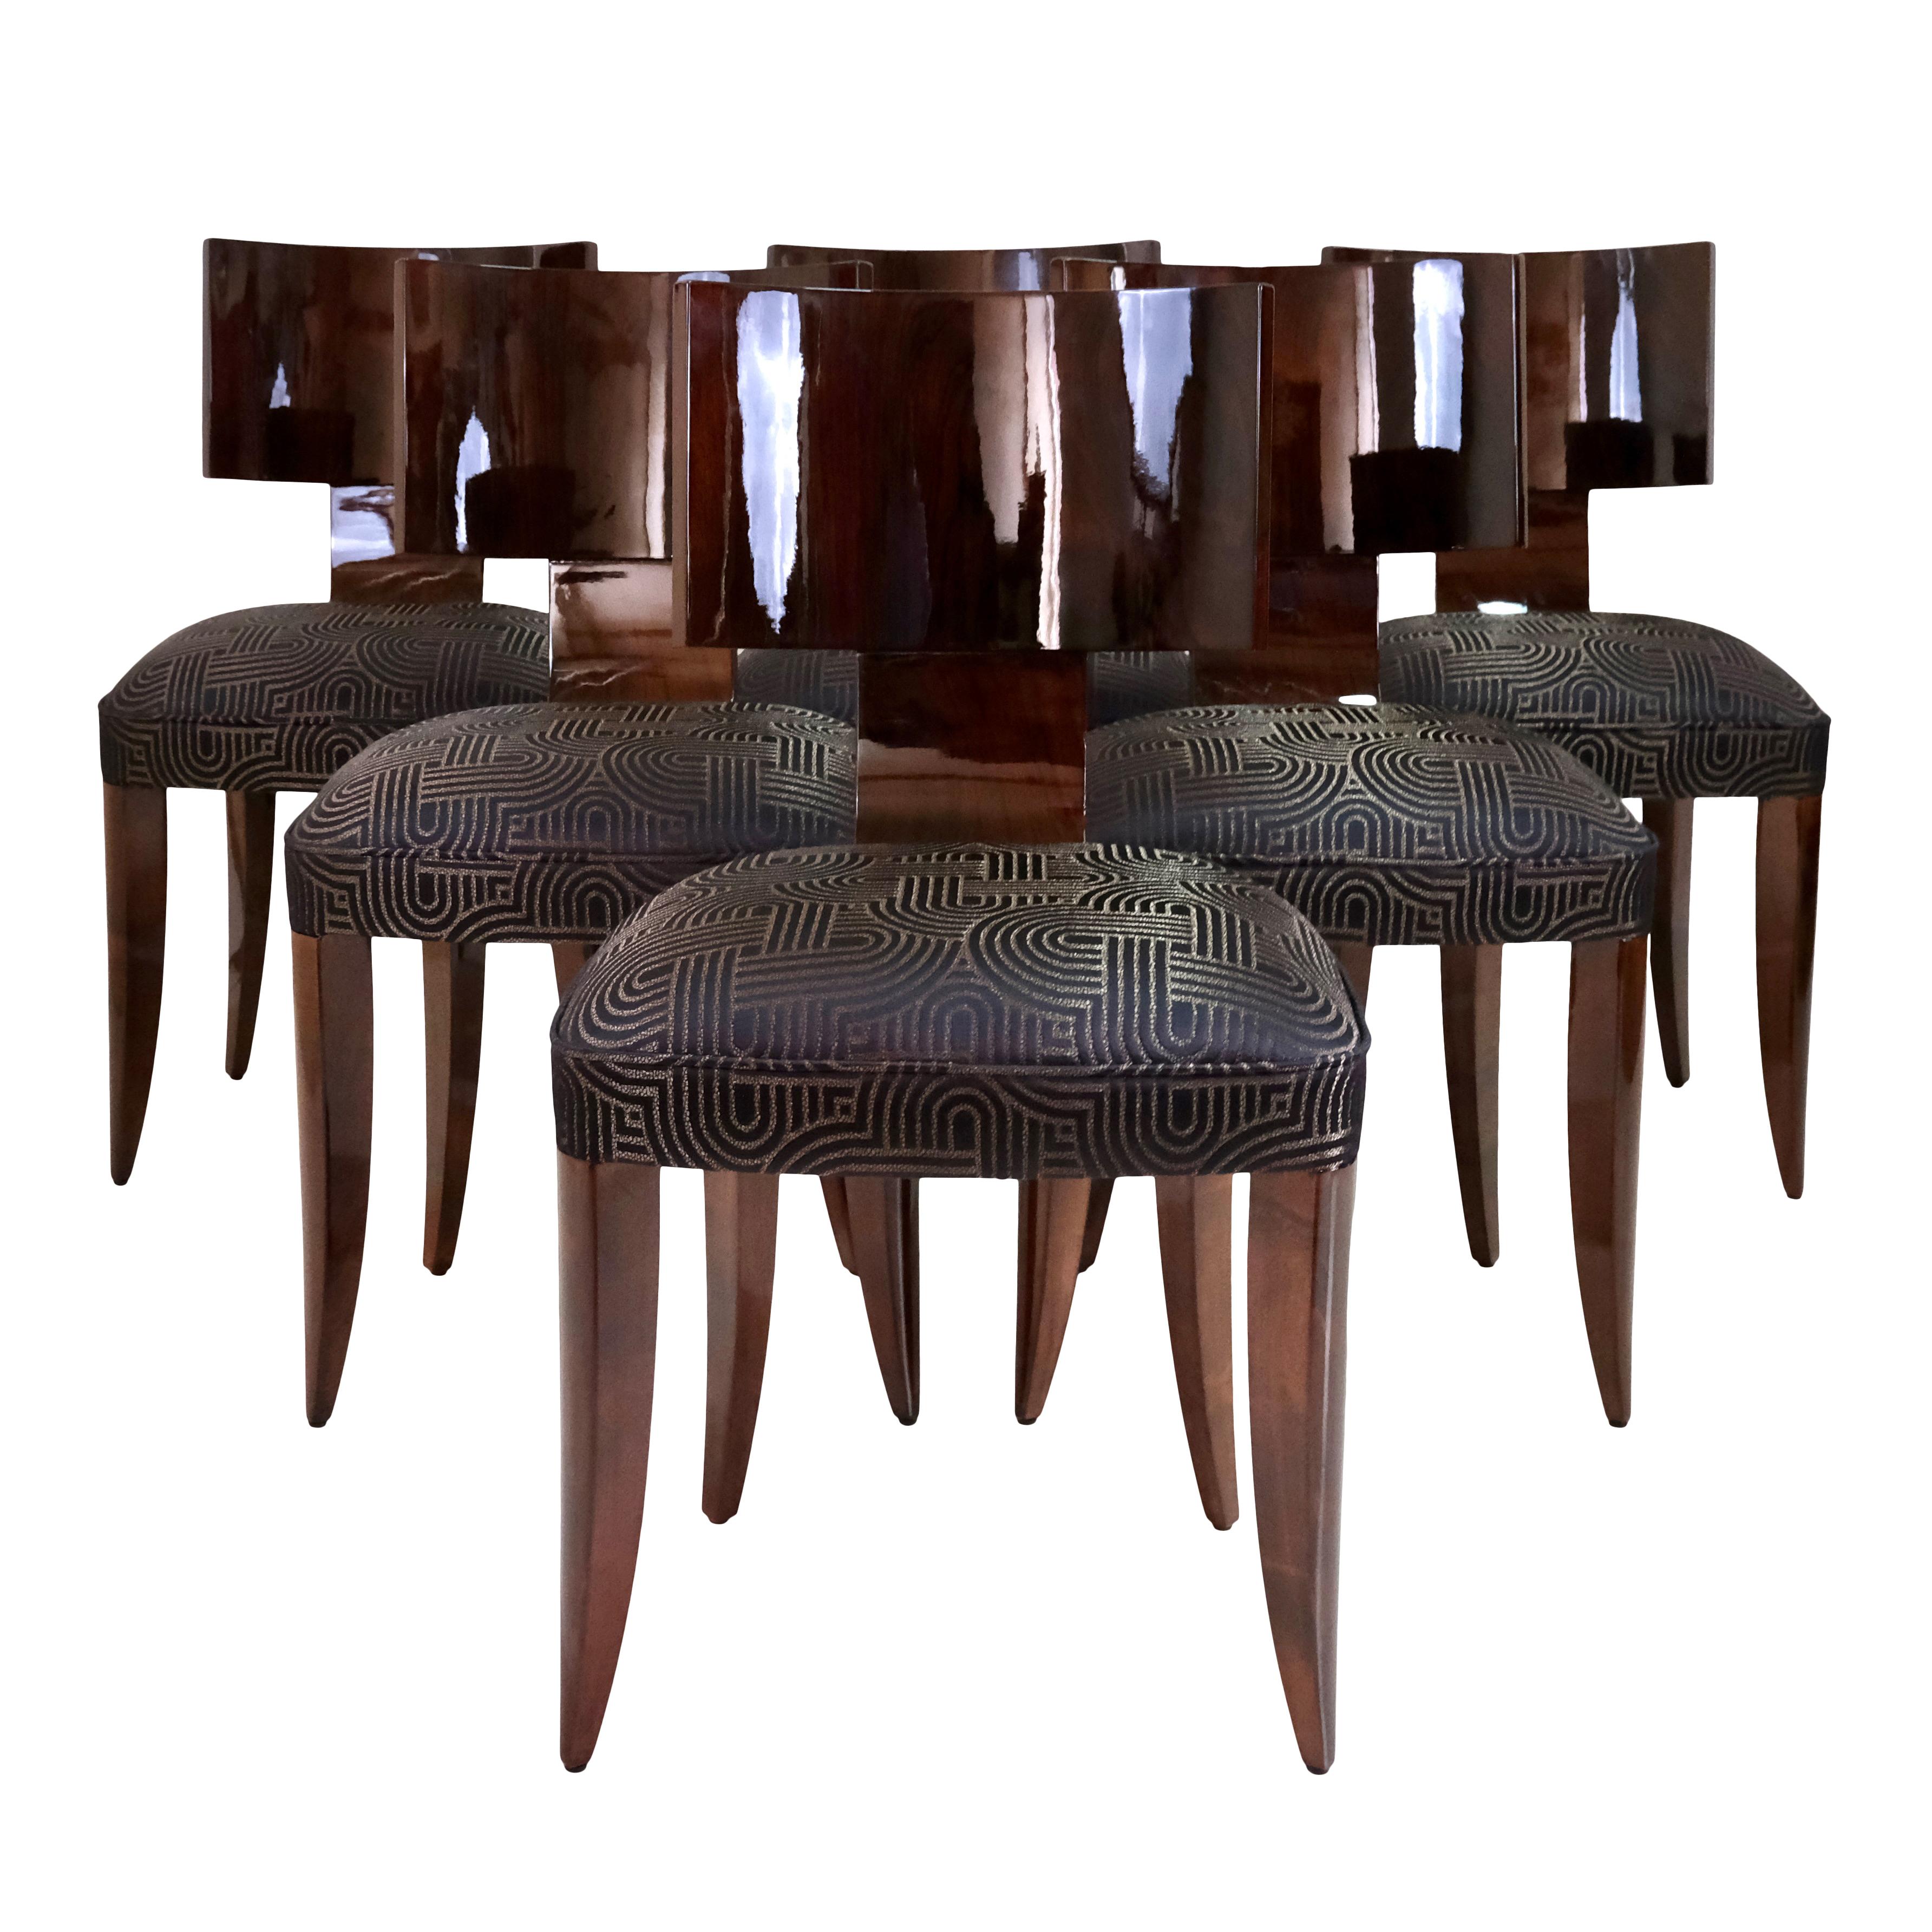 Six Modernist Art Deco Dining Chairs from 1930s France 4